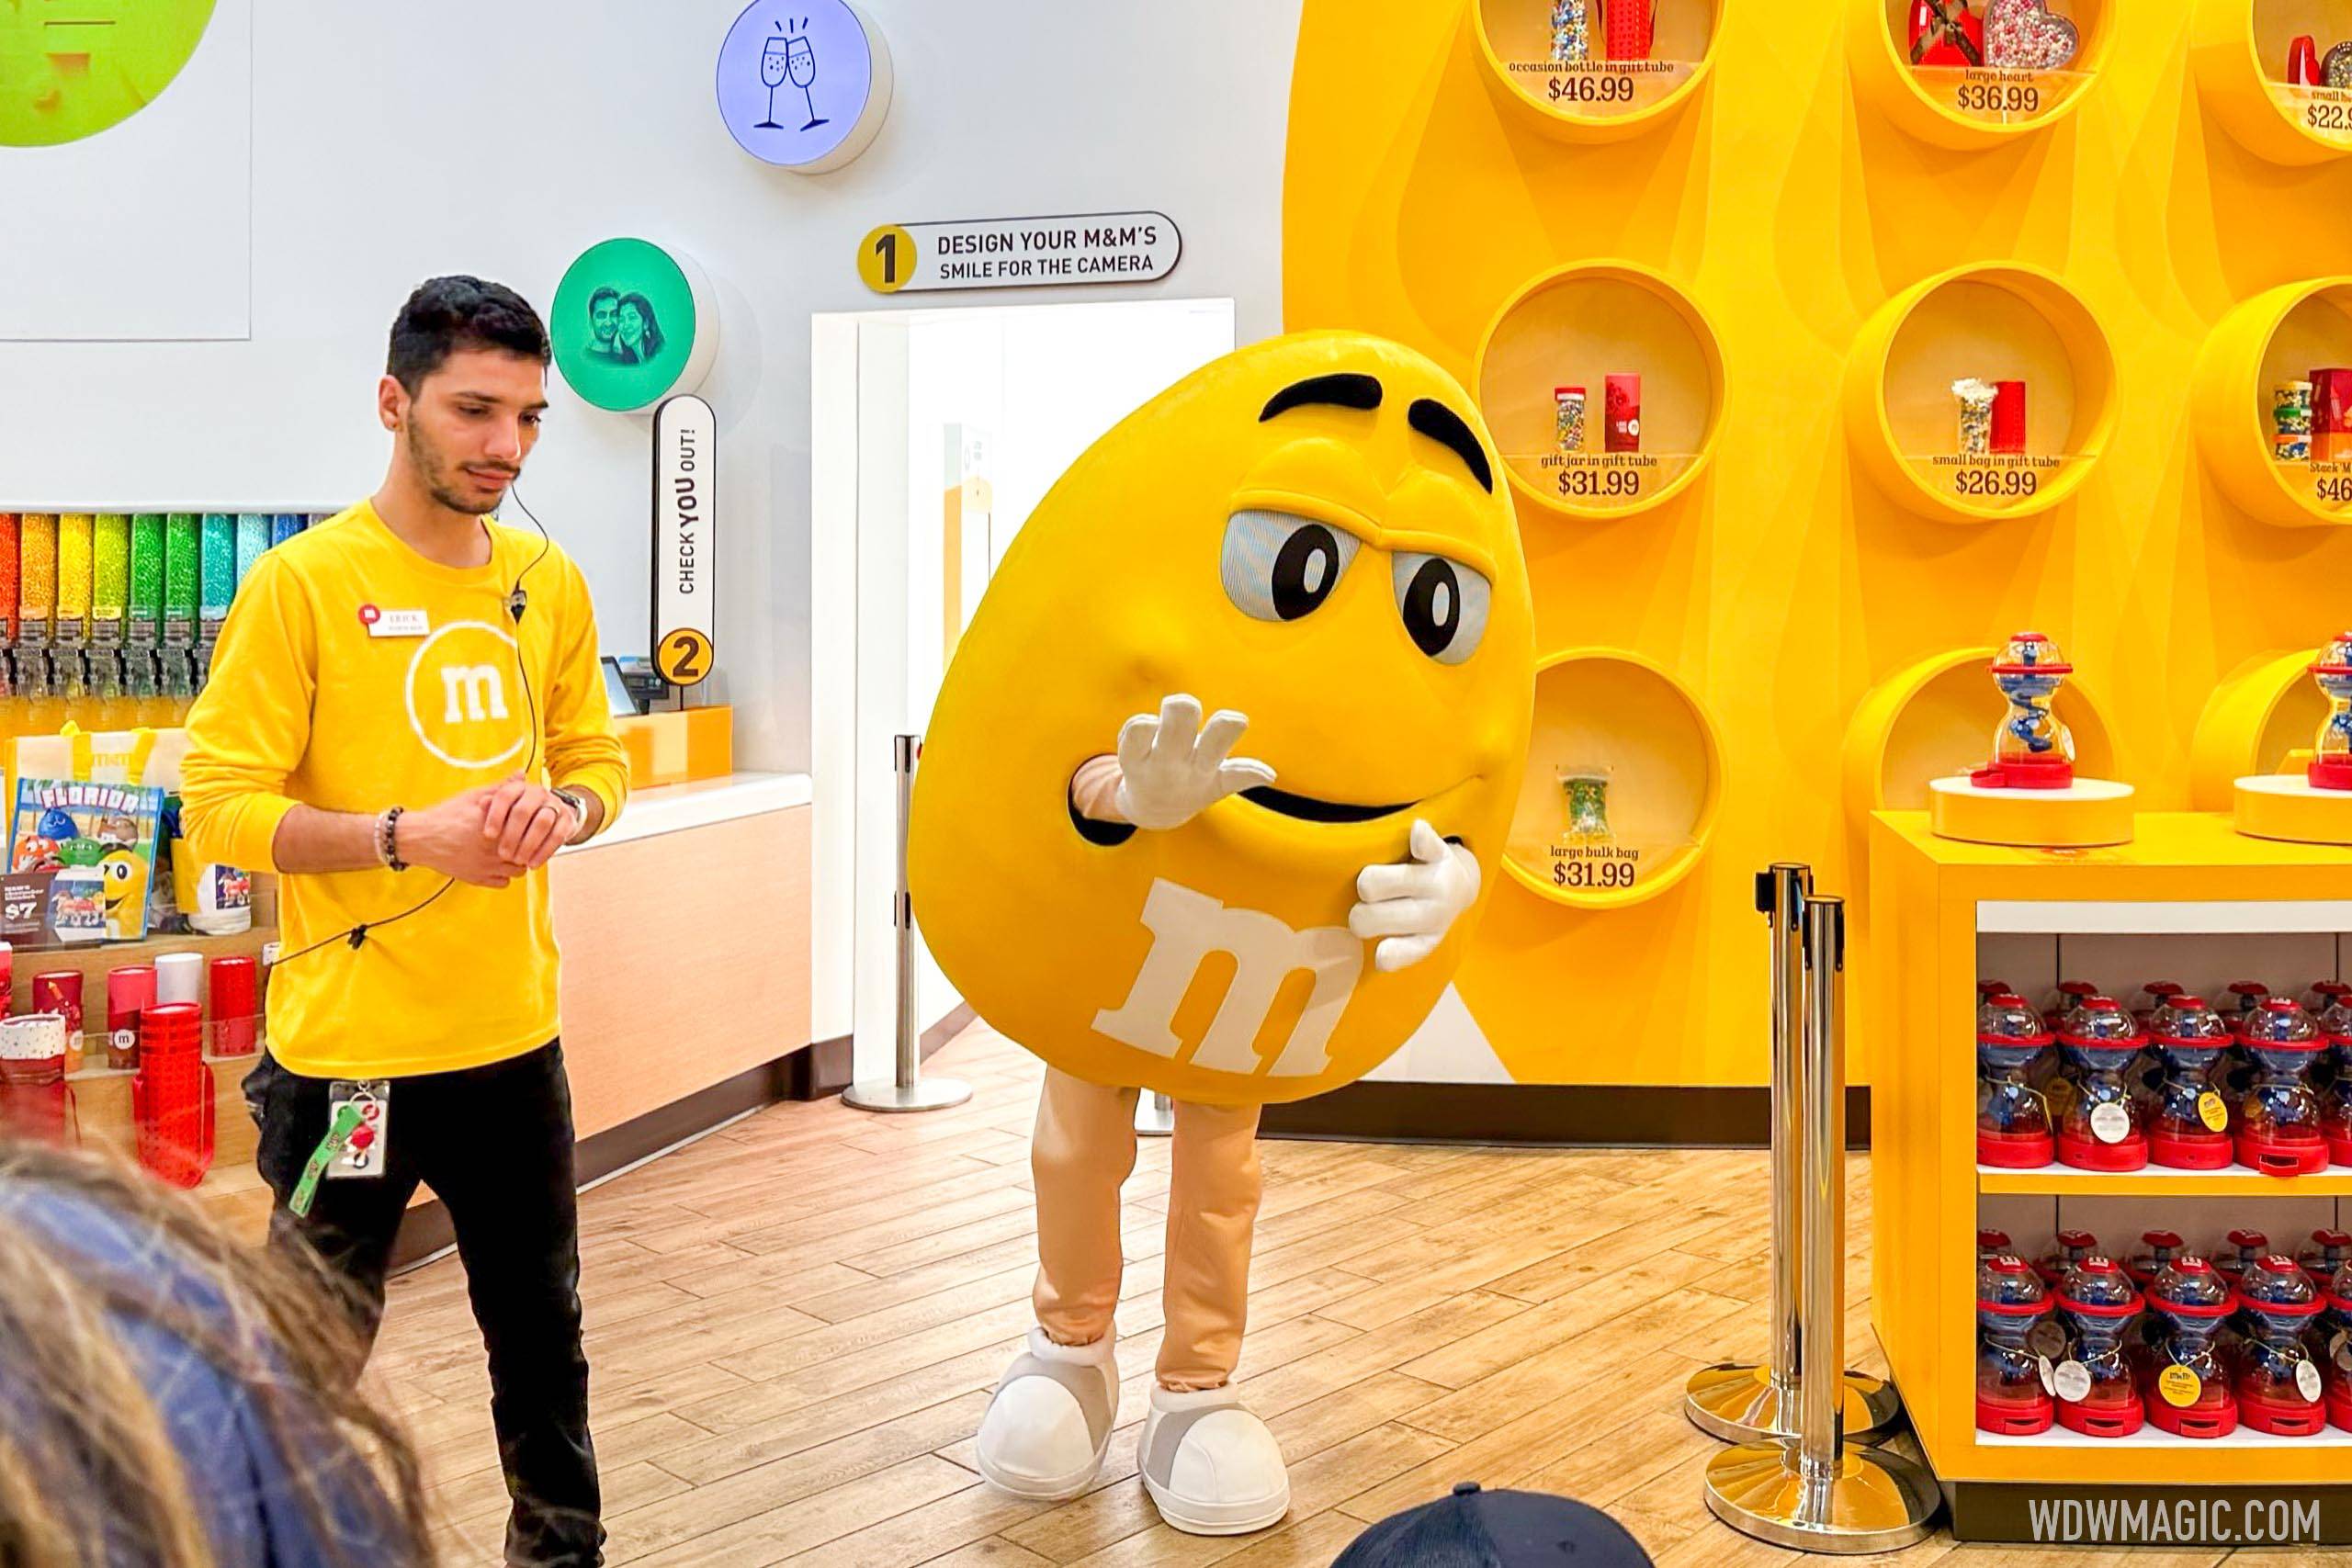 New M&M'S® Store Brings Colorful Moments, More Smiles to Walt